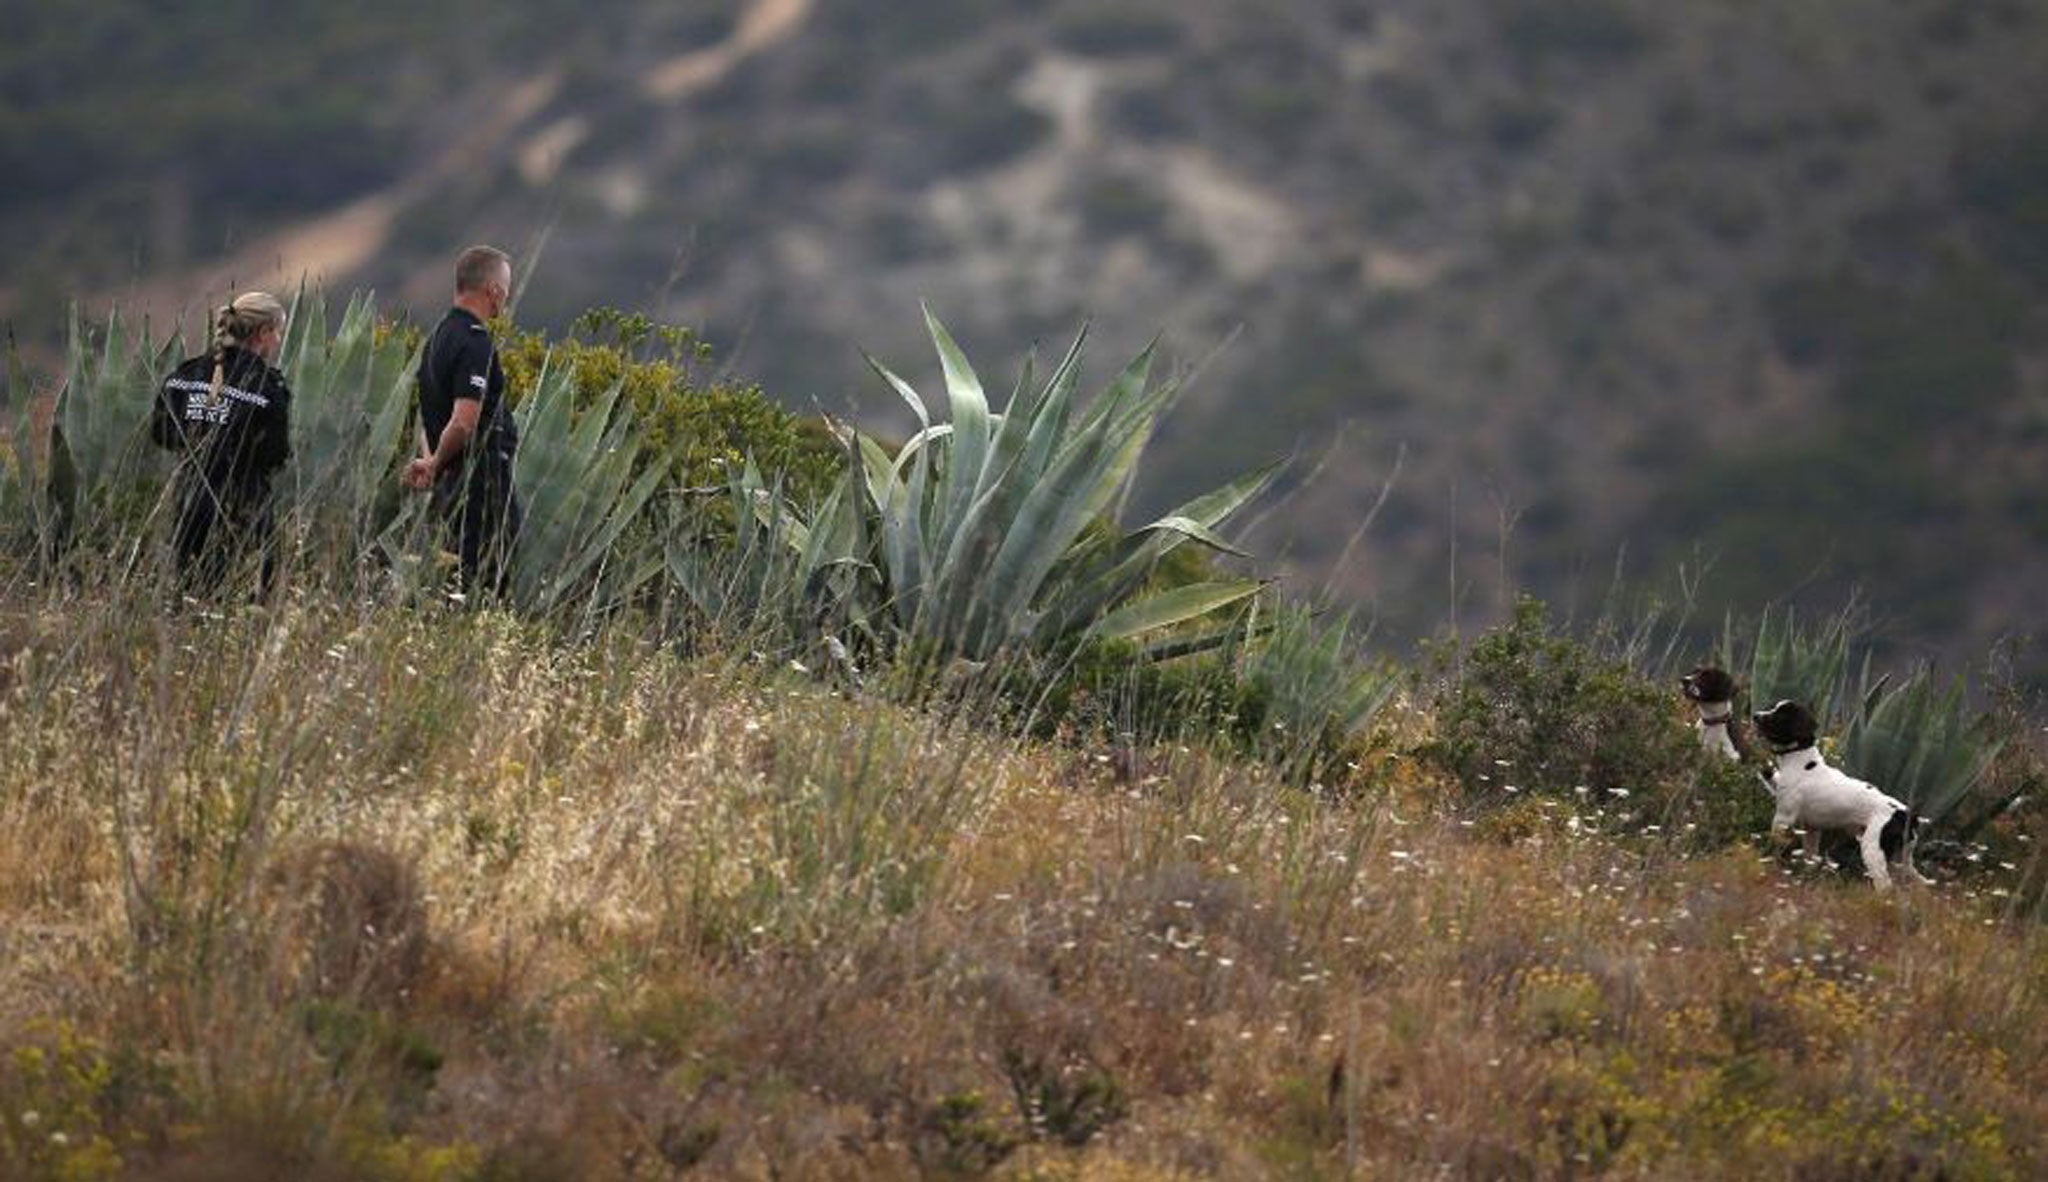 Scotland Yard detectives work with sniffer dogs on an area during the search for missing British girl Madeleine McCann in Praia da Luz, near Lagos, on 6 June, 2014